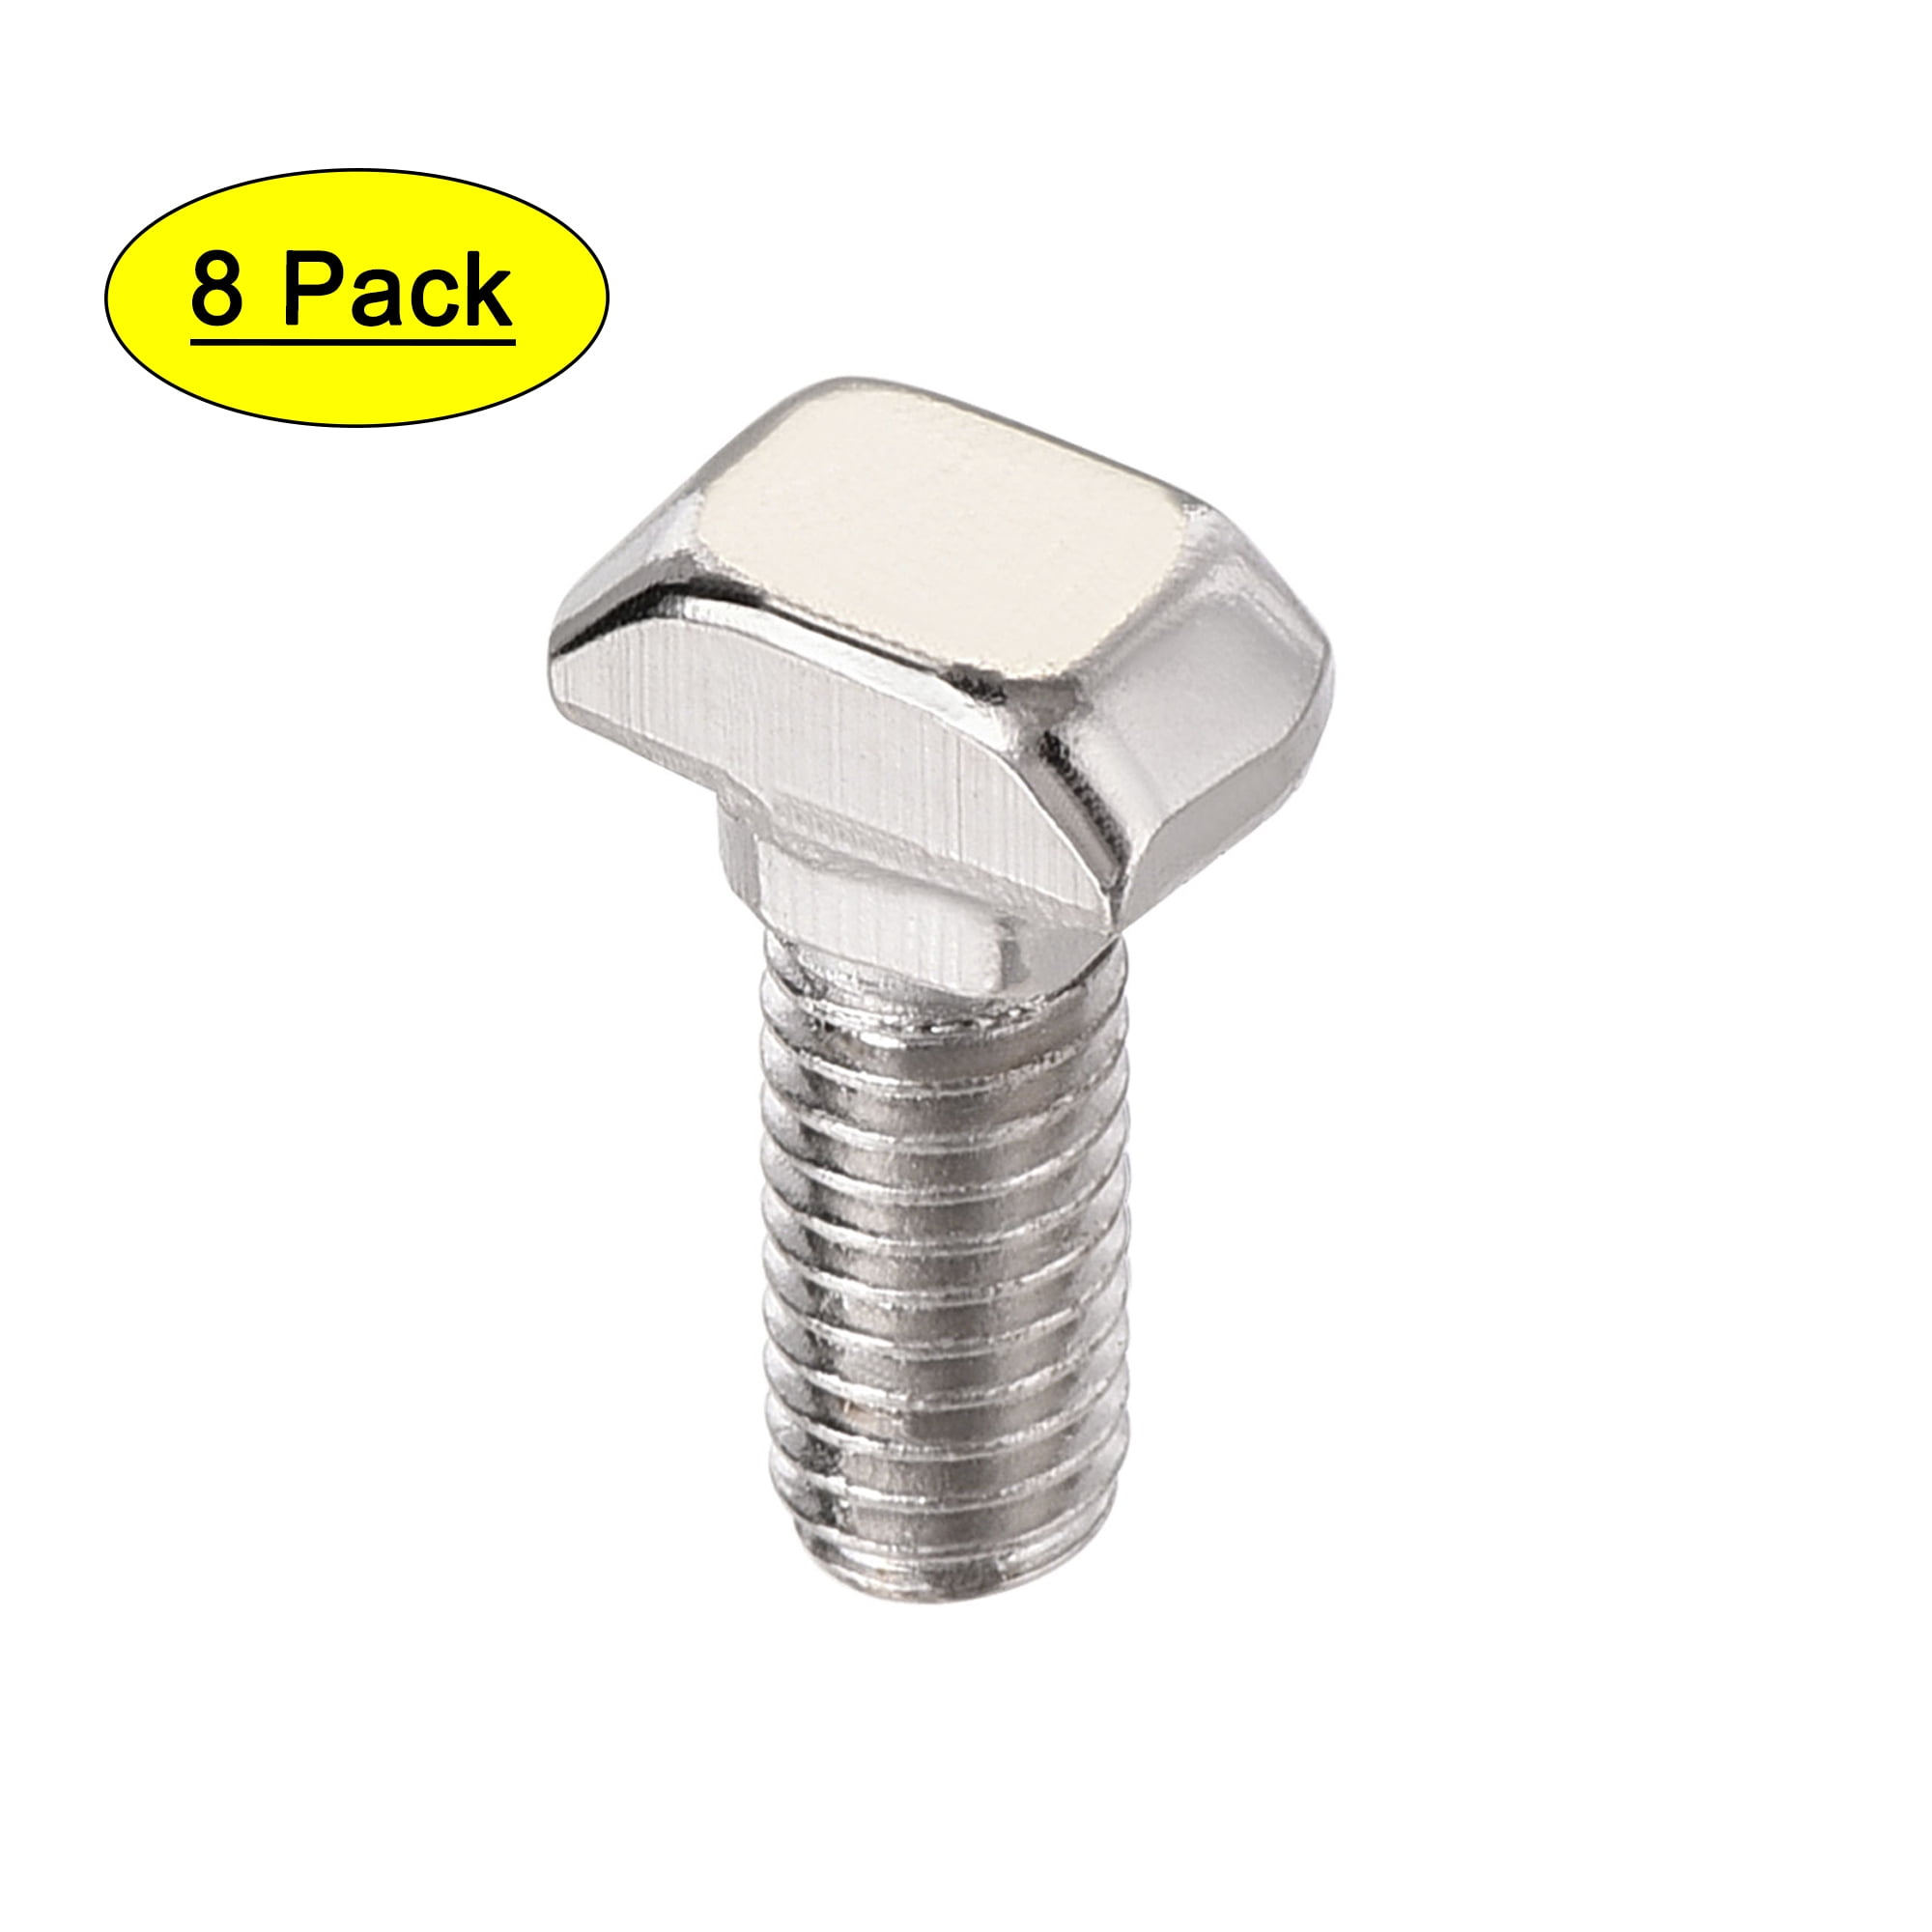 230Pcs for Various Purposes and Projects Beds Headboards Chairs Furniture Durable Silver Stainless Steel Bolt and Nut Assortment Hex Socket Screws